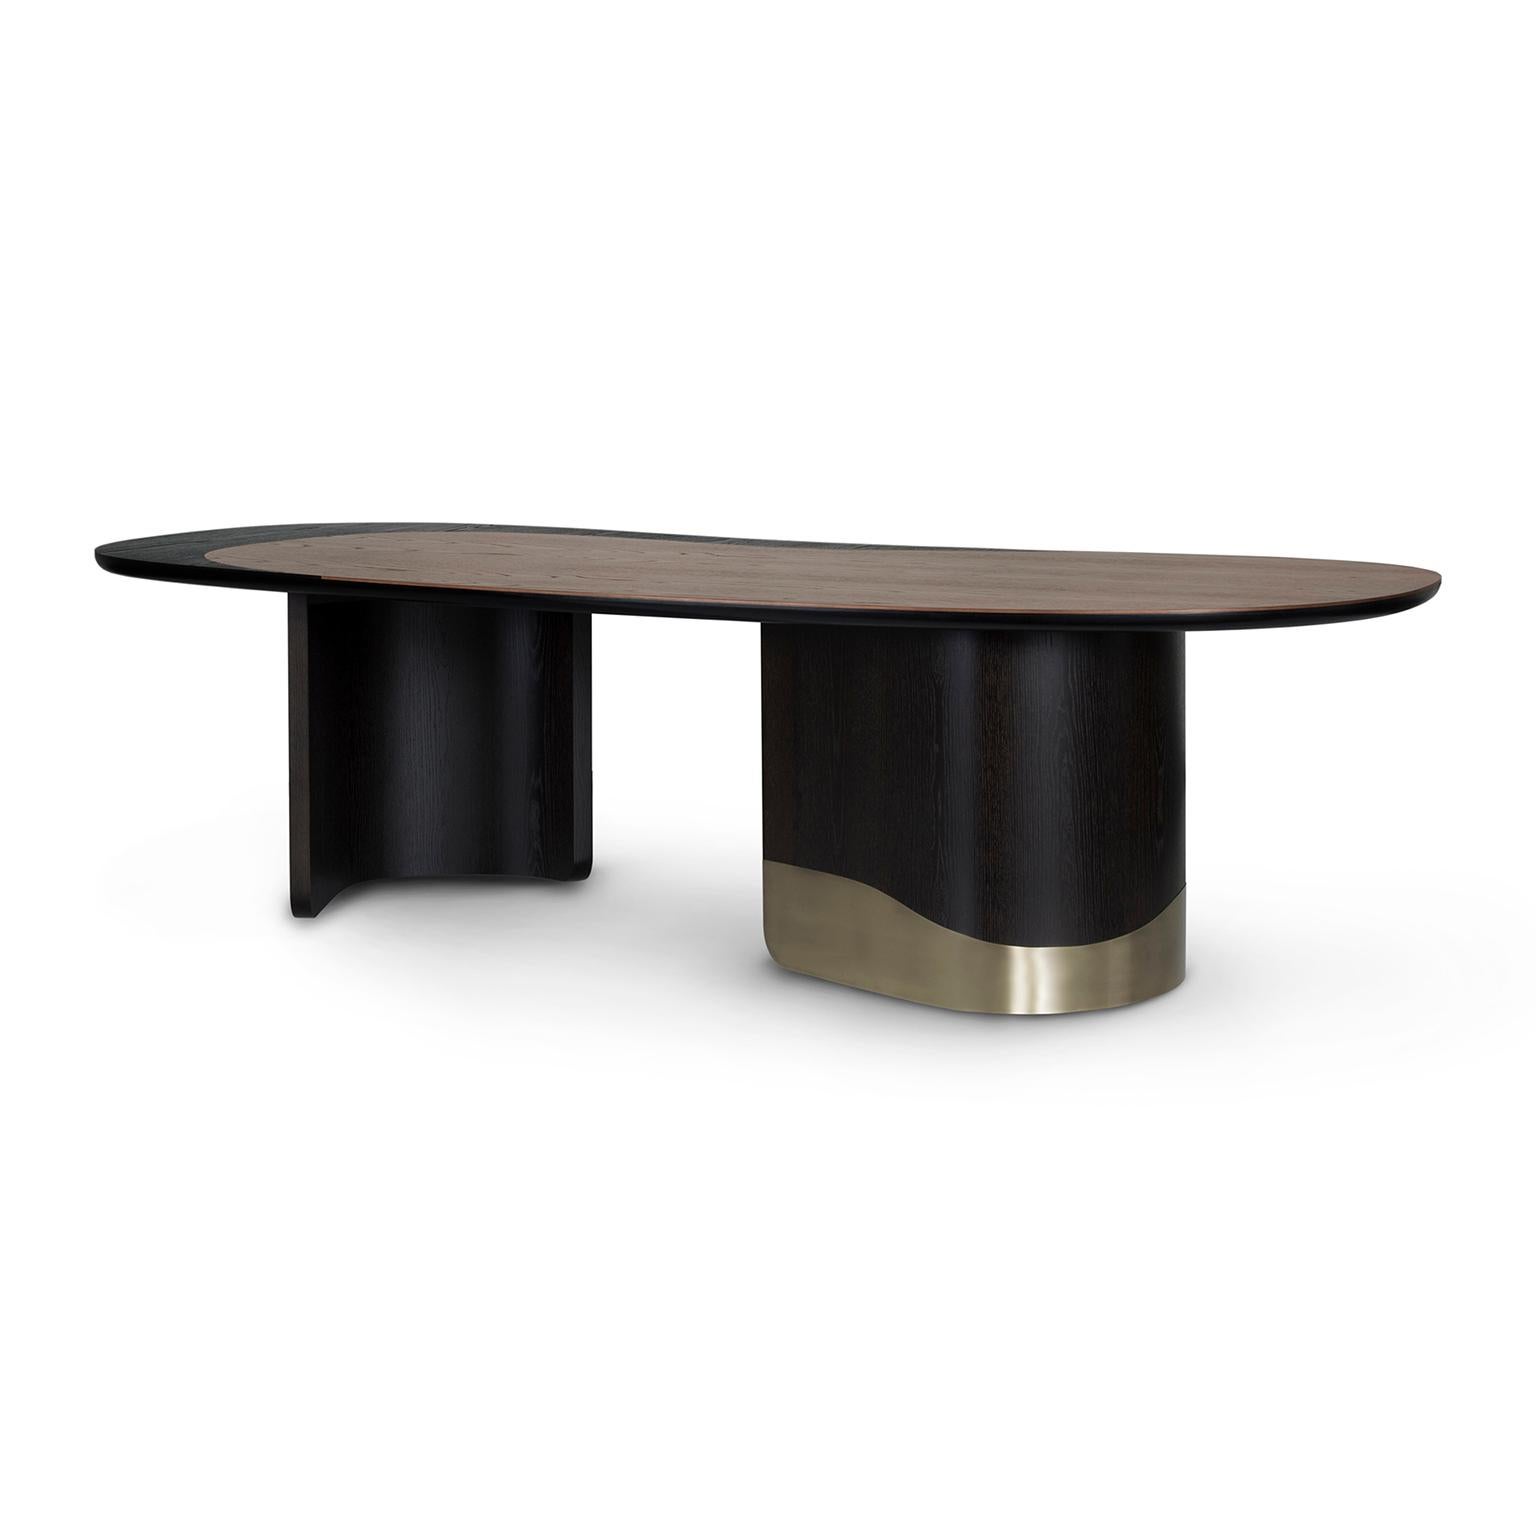 Armona Dining Table, Contemporary Collection, Handcrafted in Portugal - Europe by Greenapple.

Designed by Rute Martins for the Contemporary Collection, raw beauty and exquisite design are harmoniously combined in the Armona dining table, as it